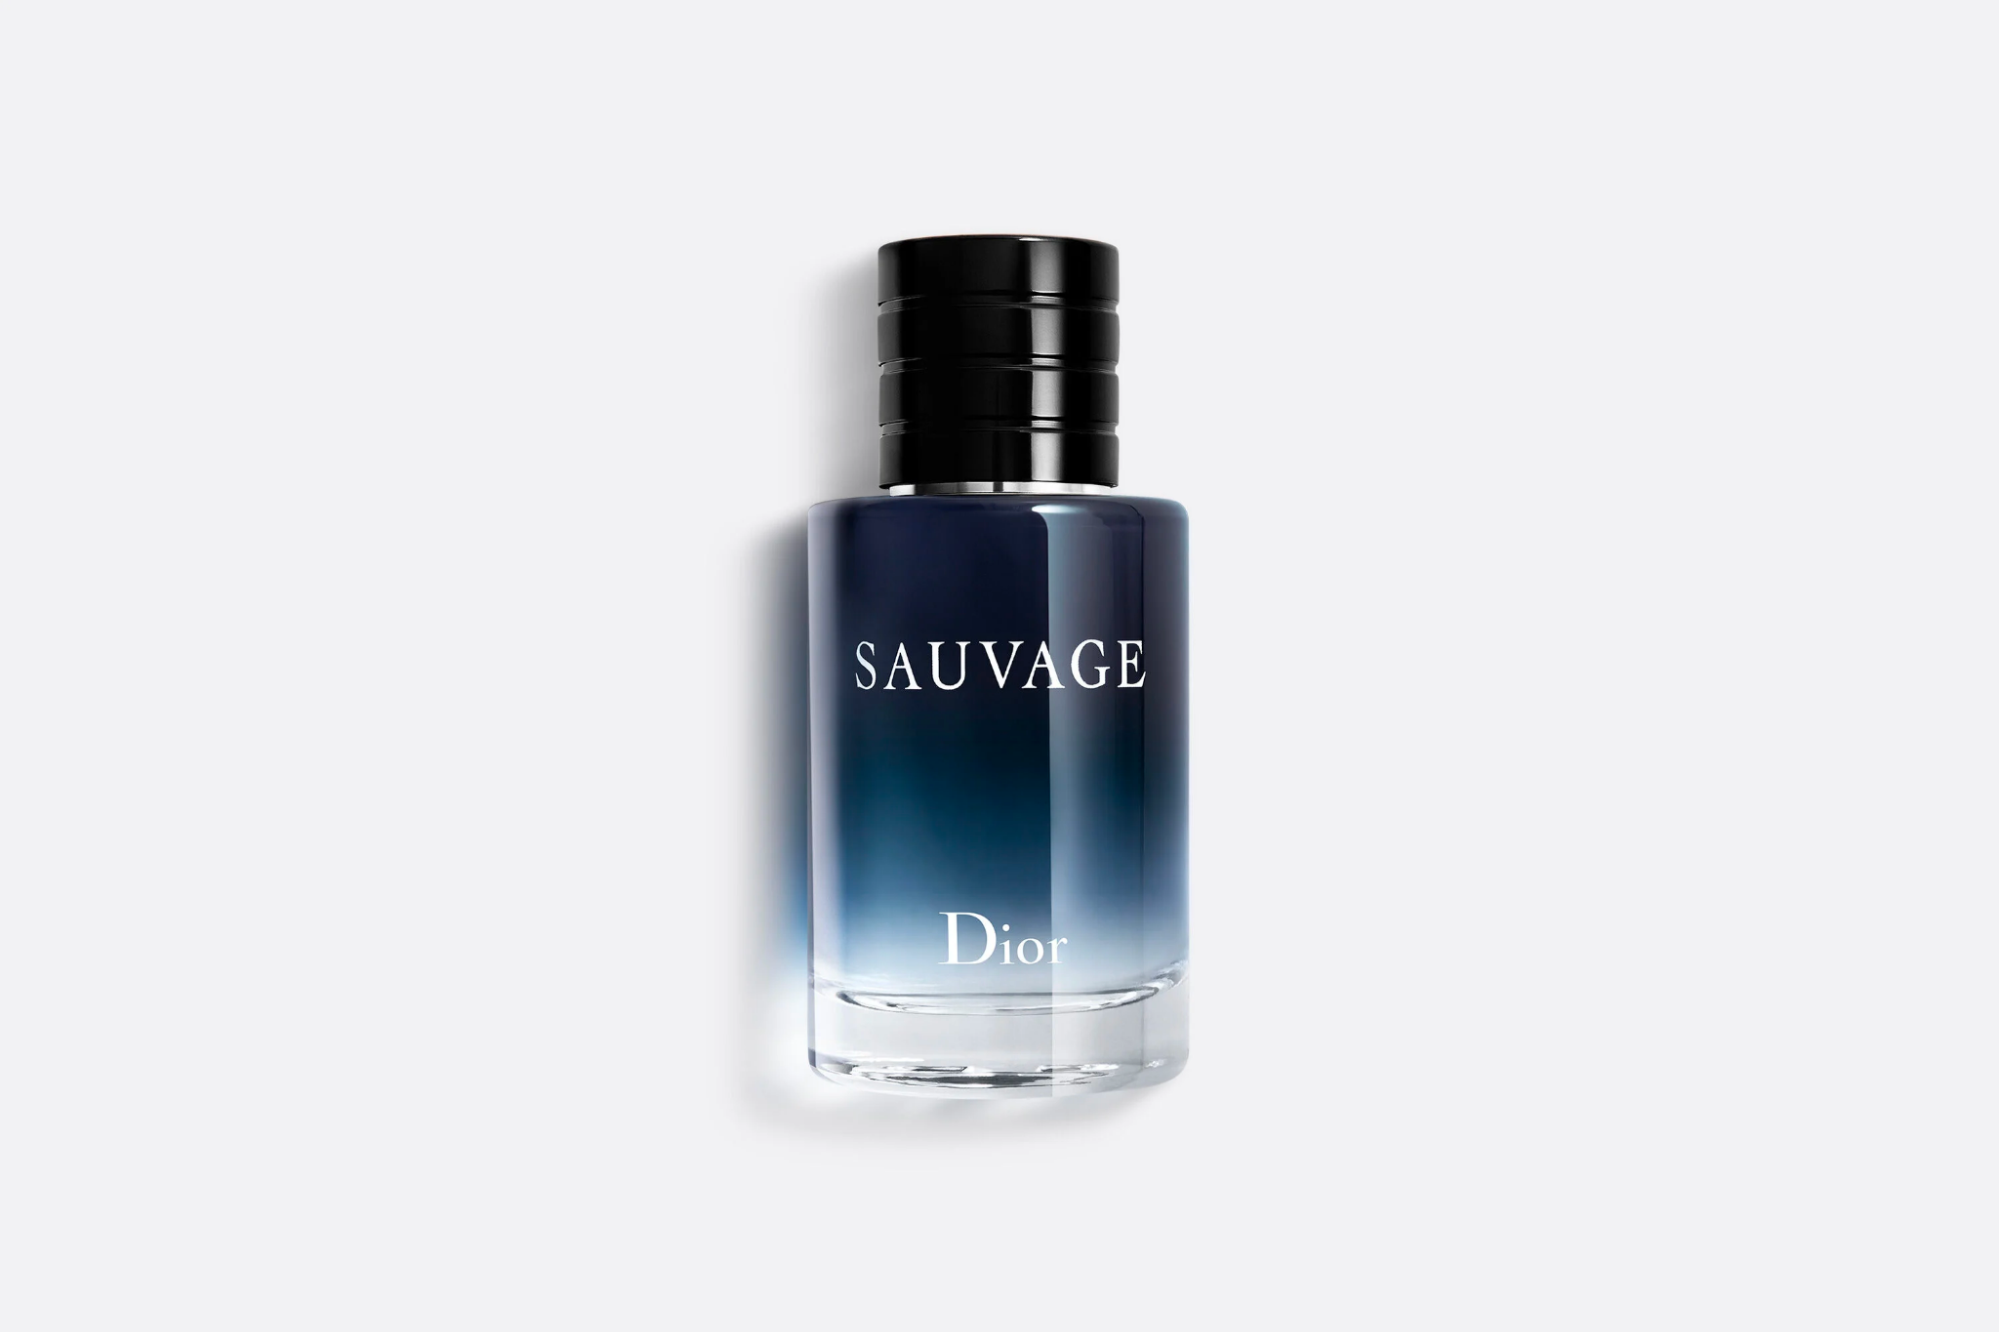 Men's Cologne,refreshing And Long Lasting Perfume For Dating And